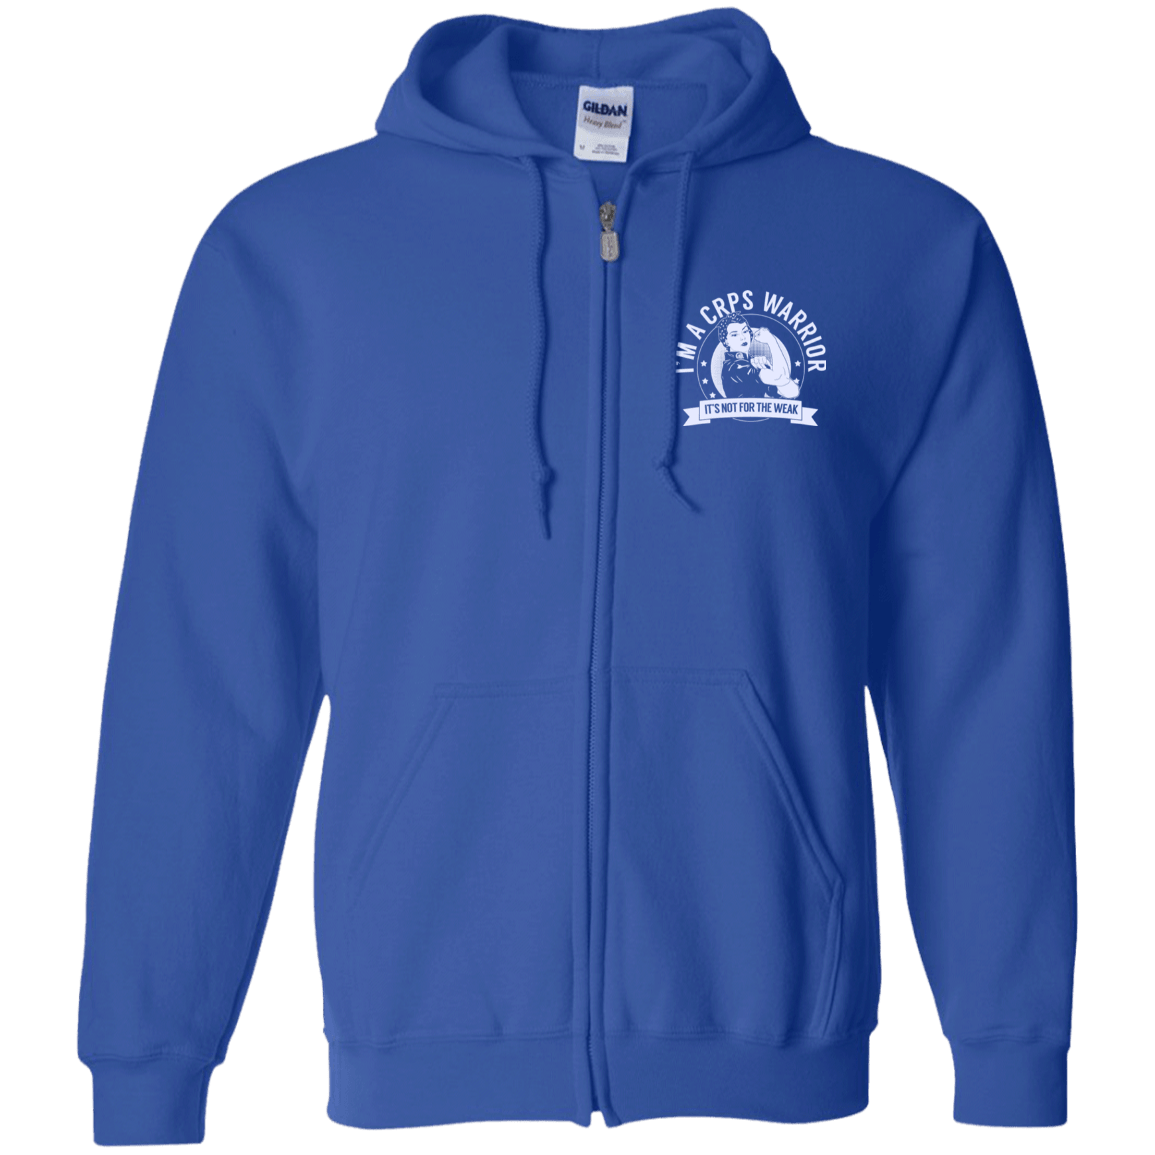 Complex Regional Pain Syndrome - CRPS Warrior NFTW Zip Up Hooded Sweatshirt - The Unchargeables